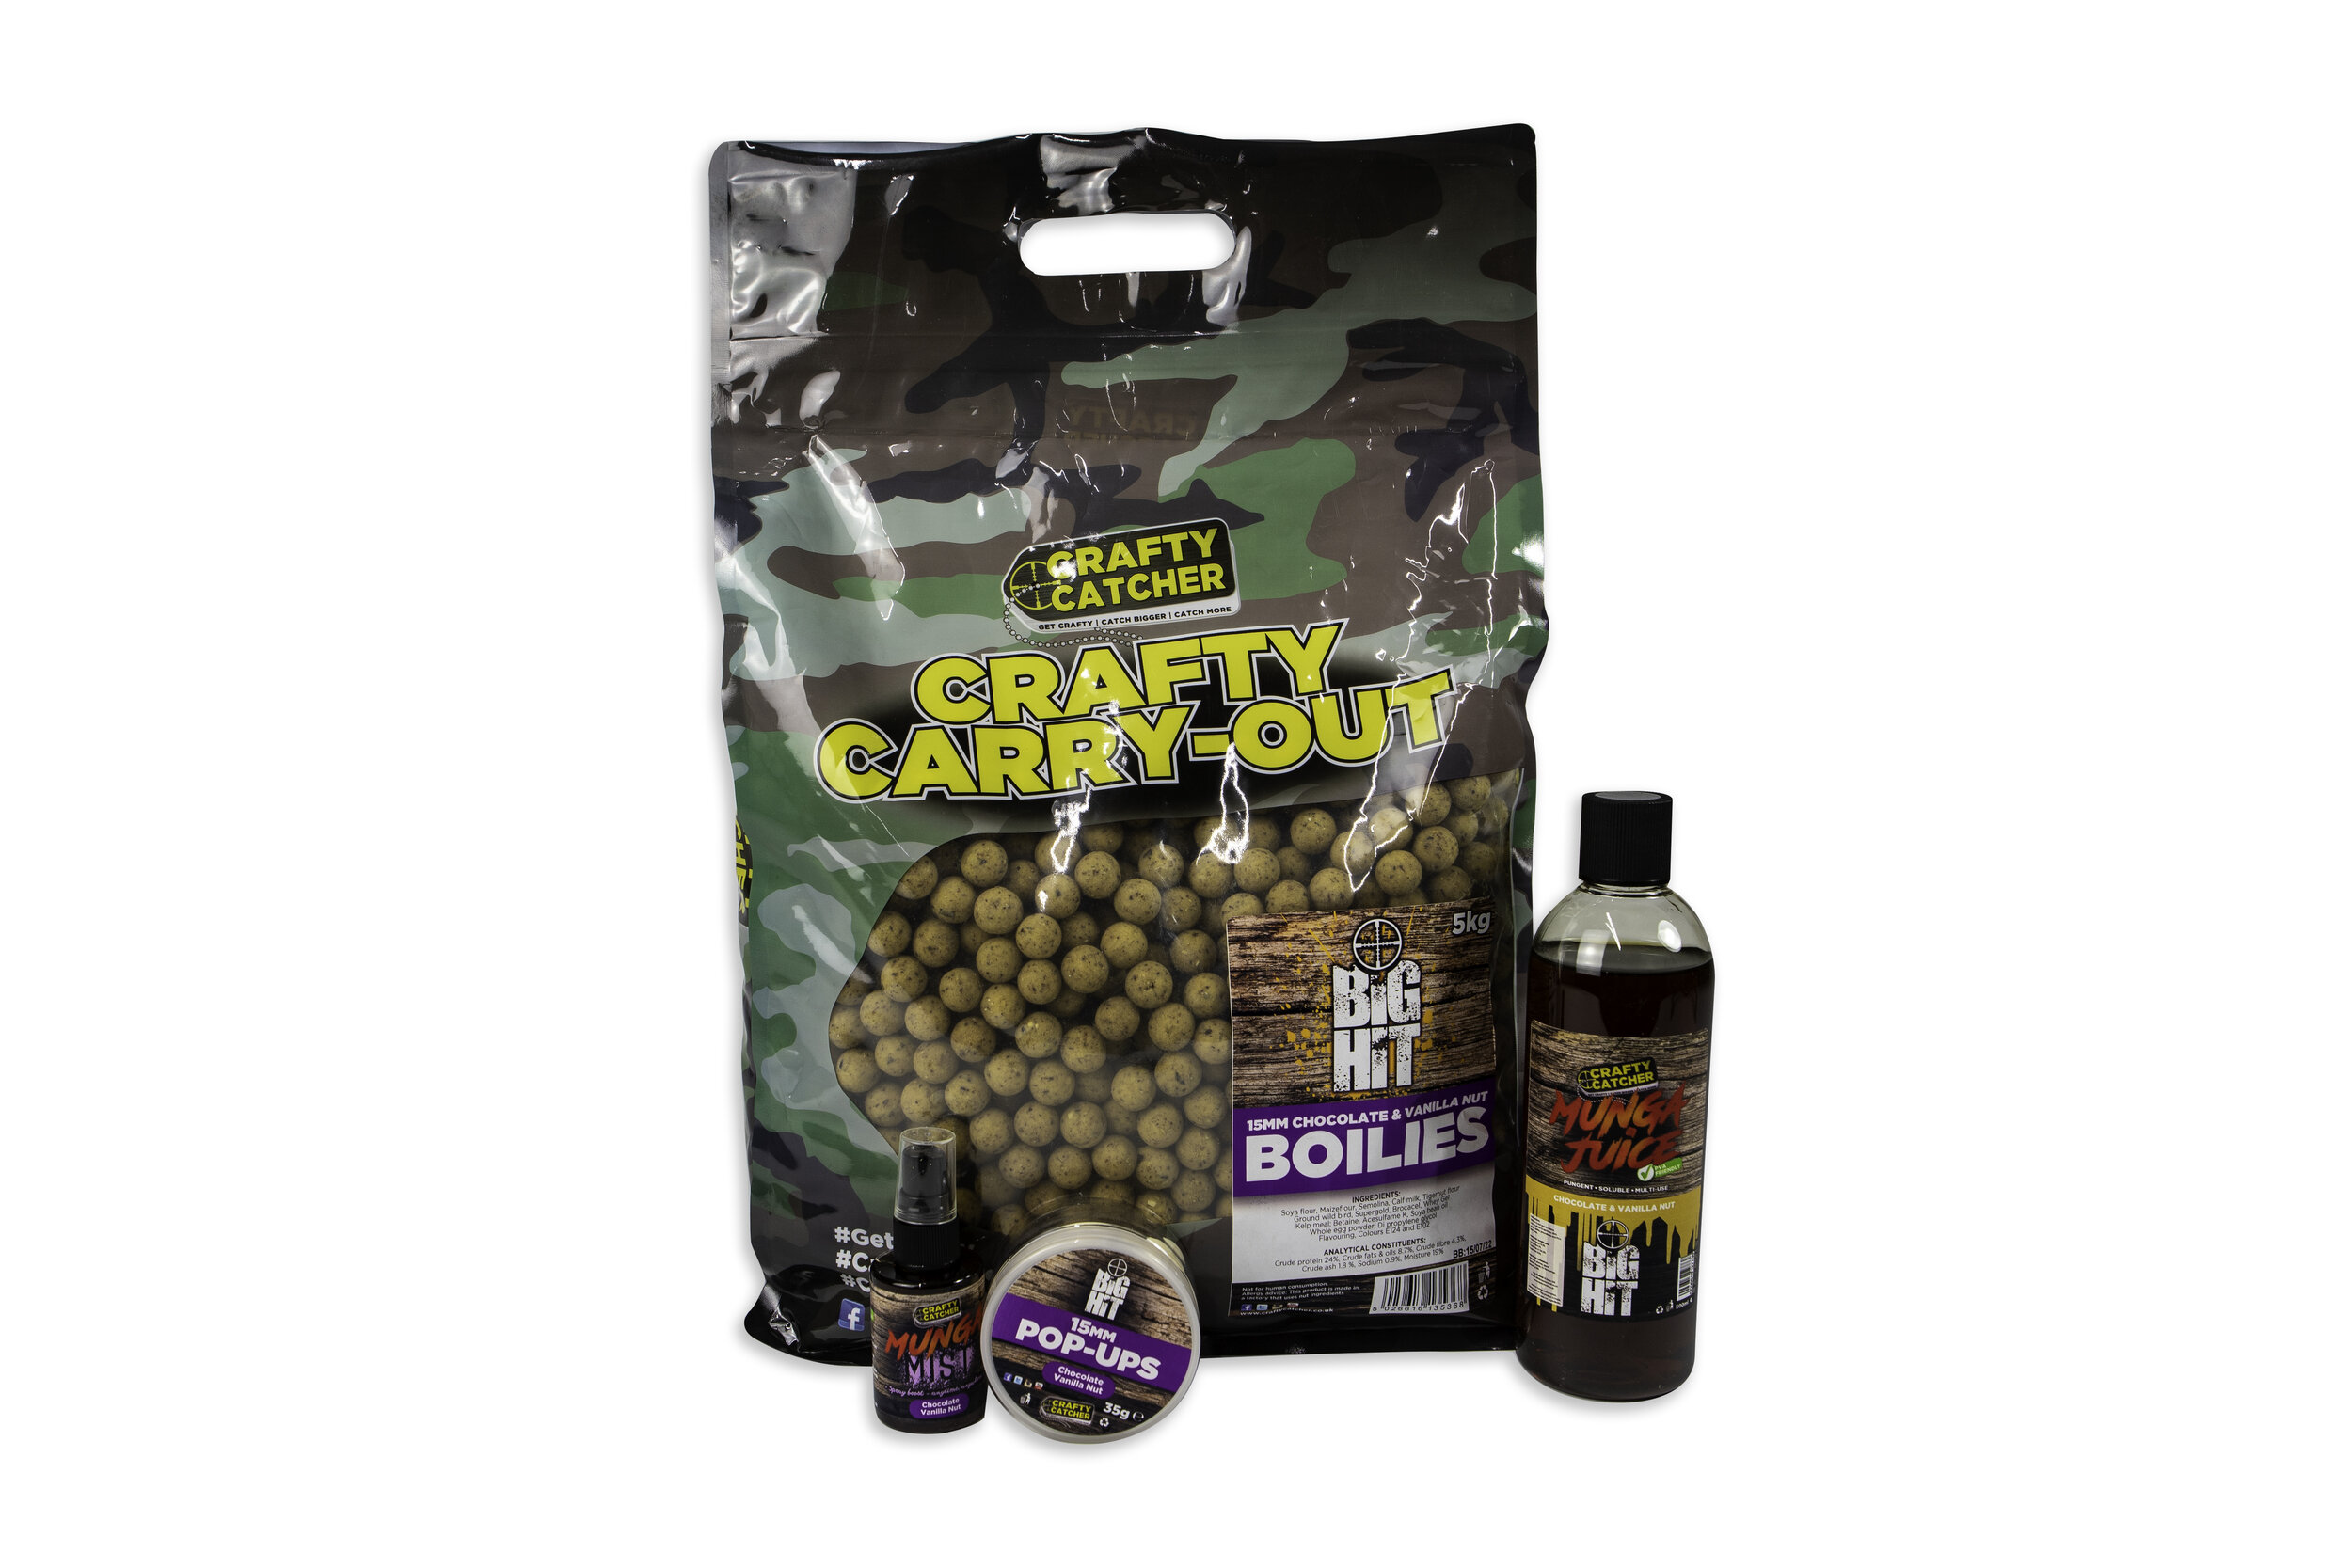 1,20€/100g Crafty Catcher Retro Range Peanut Pro Boilies PopUp Wafters Booster 